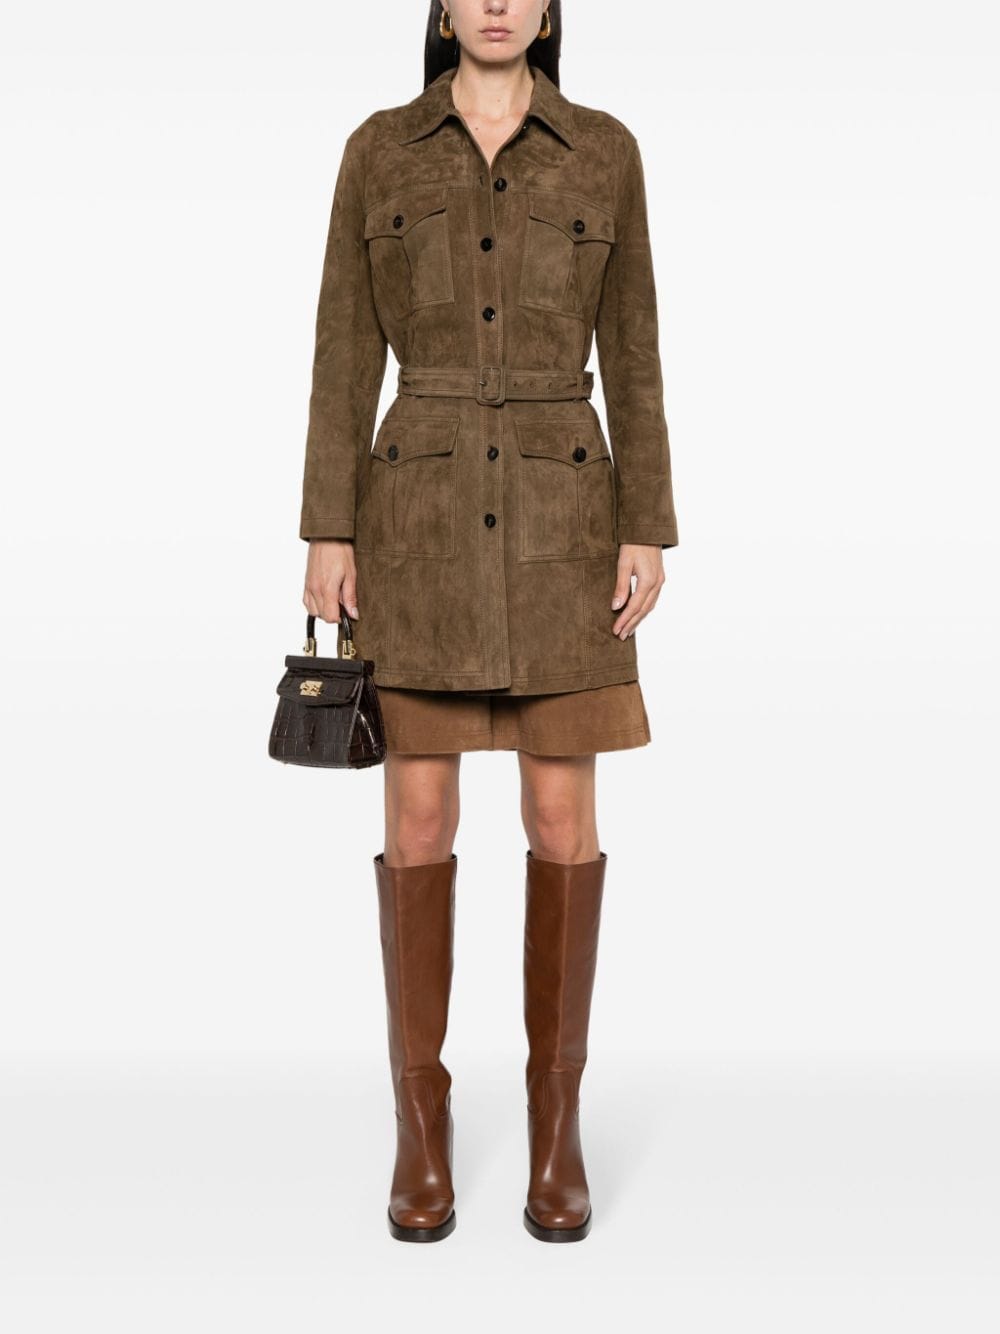 TOM FORD suede leather coat - Bruin